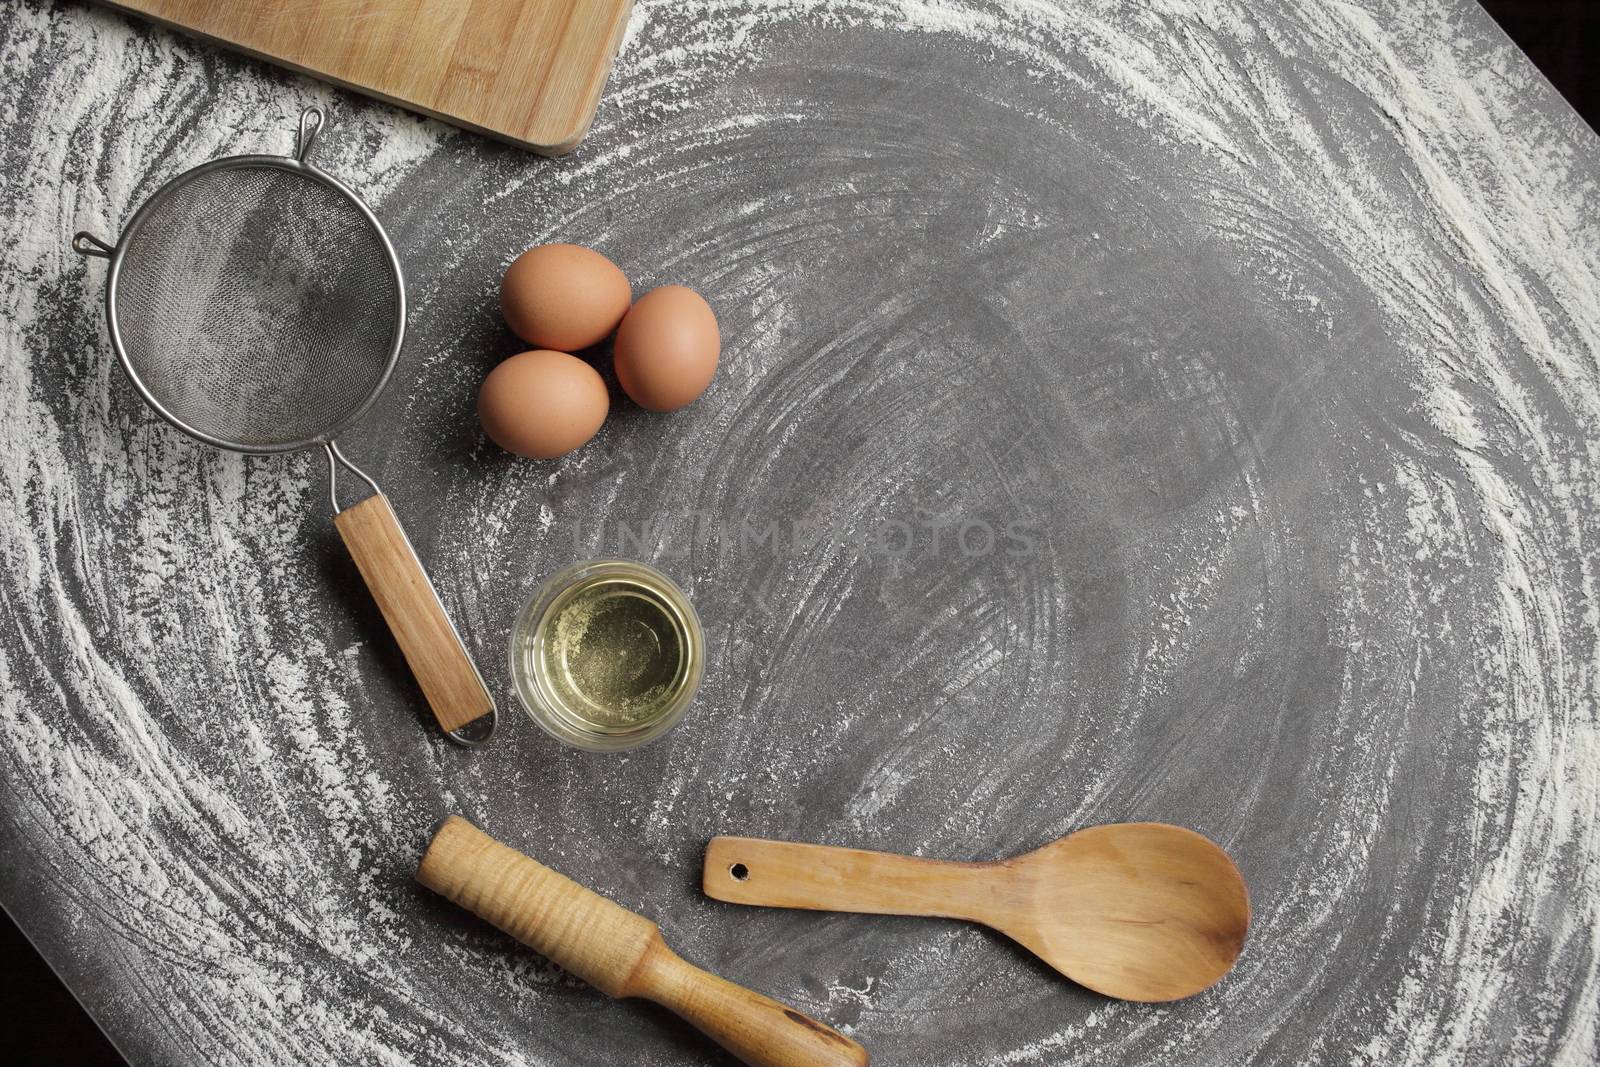 Chicken egg, flour, olive oil, kitchen tool on gray table background. Products for baking bakery products. Cutting board, rolling pin, flour sieve, wooden spoon. For bread or cake